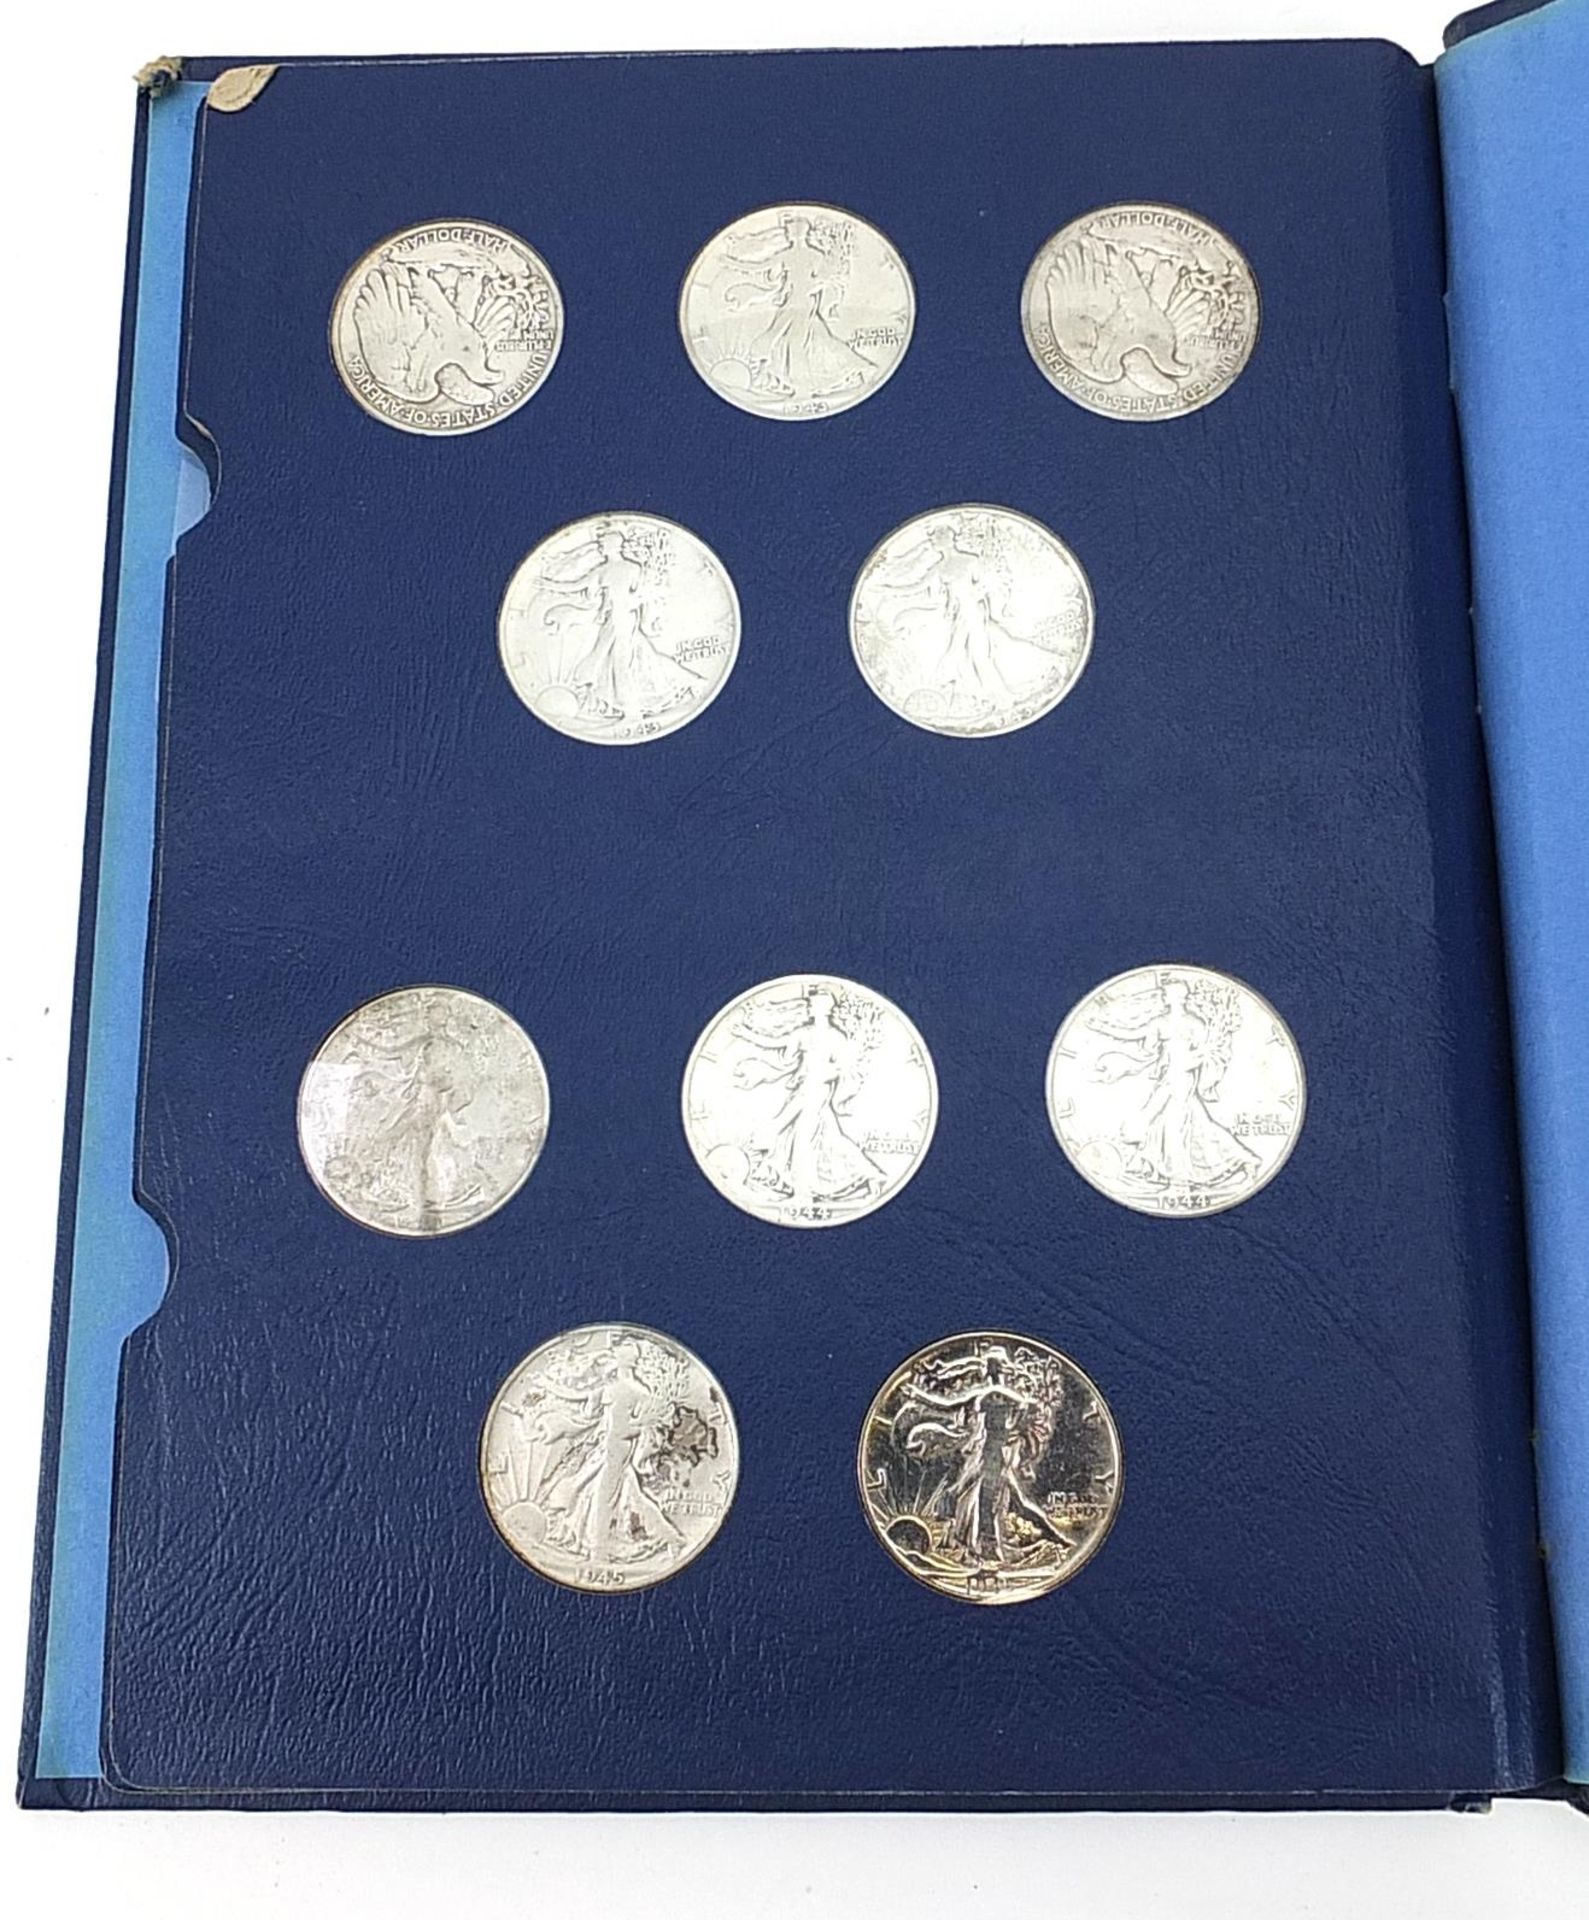 American coinage including Liberty Walking halves arranged in two albums and 1993 one ounce silver - Image 6 of 6